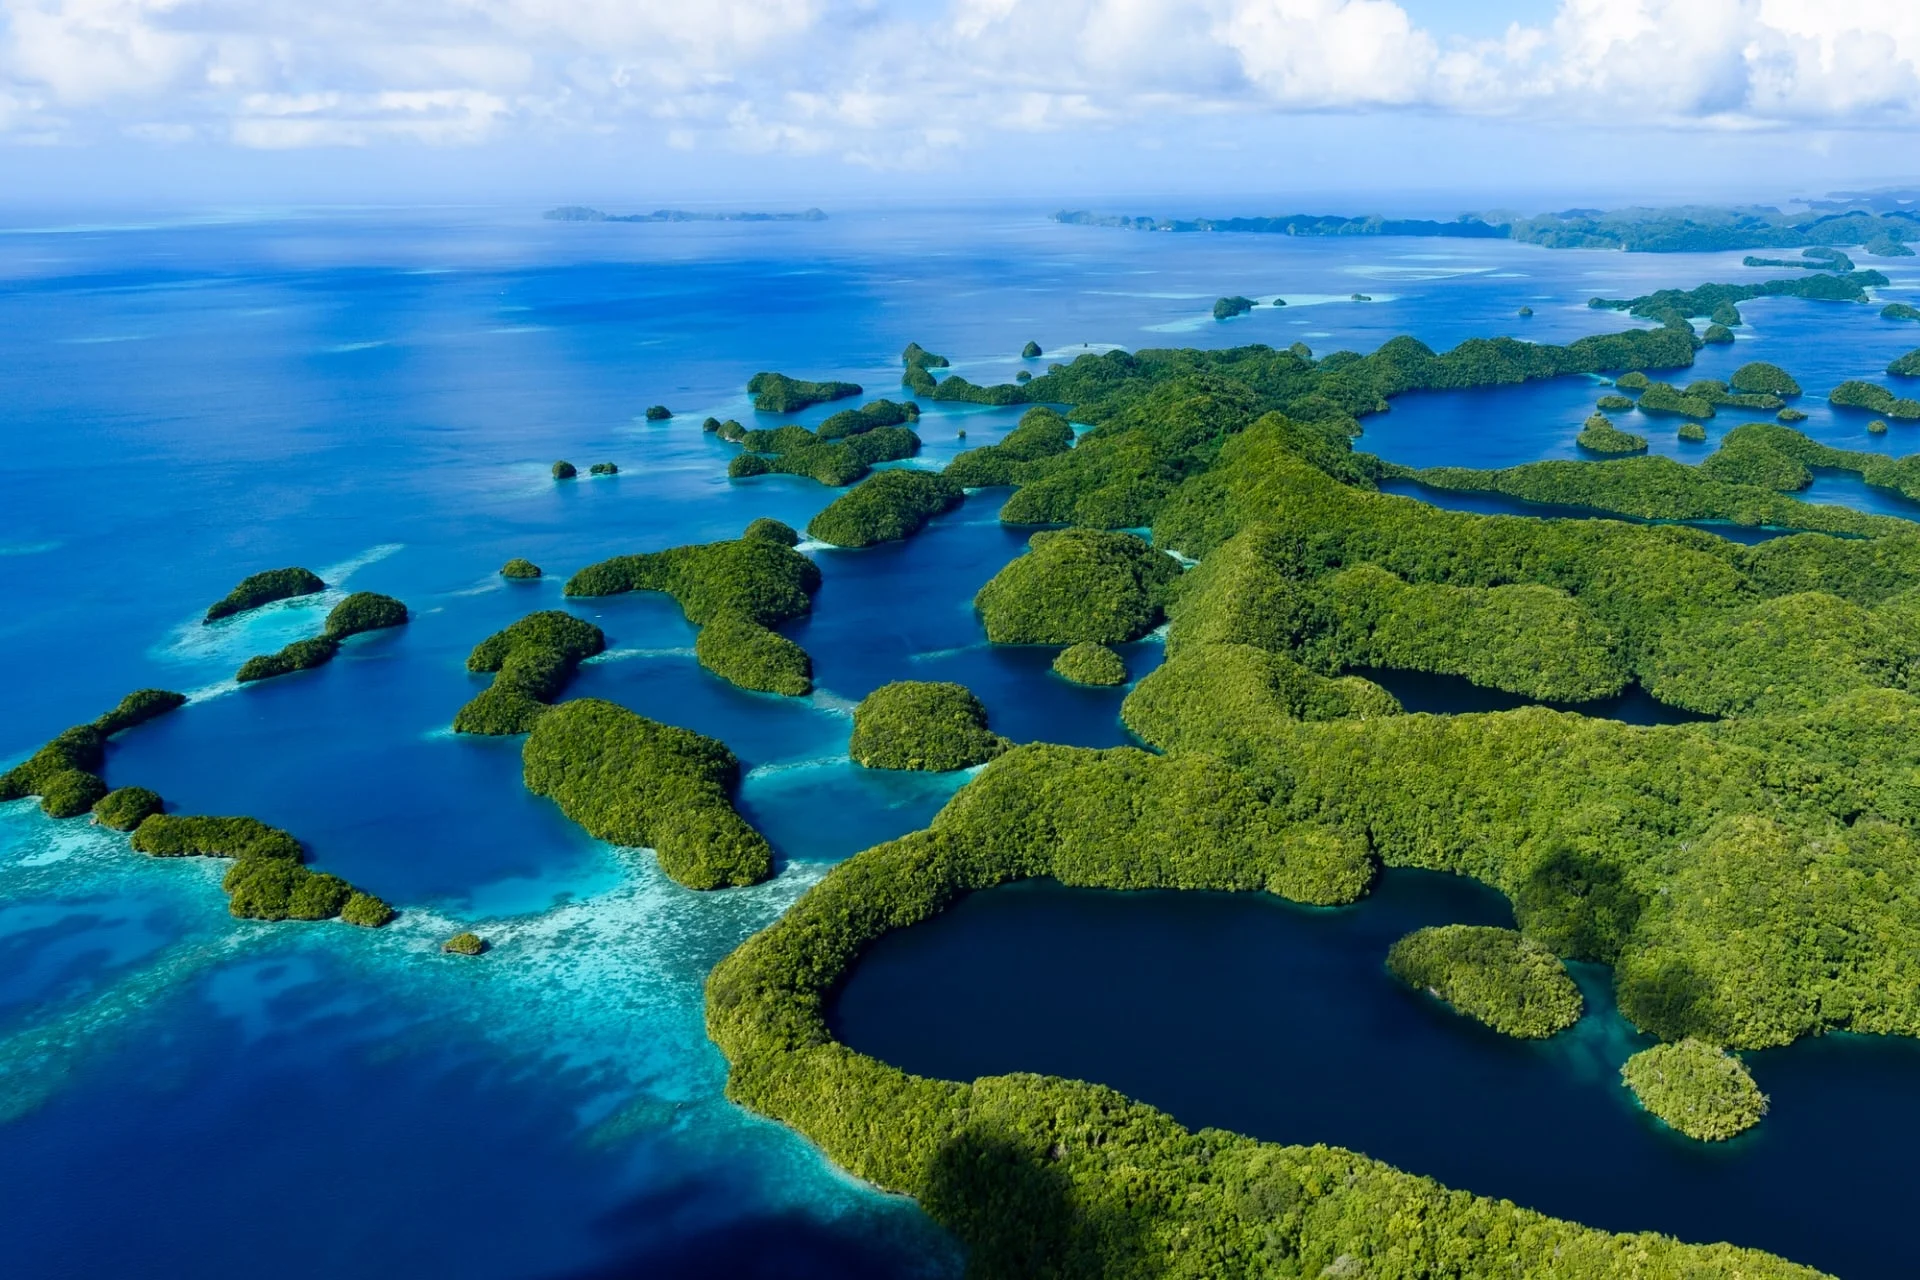 An aerial view of a group of islands in the ocean.